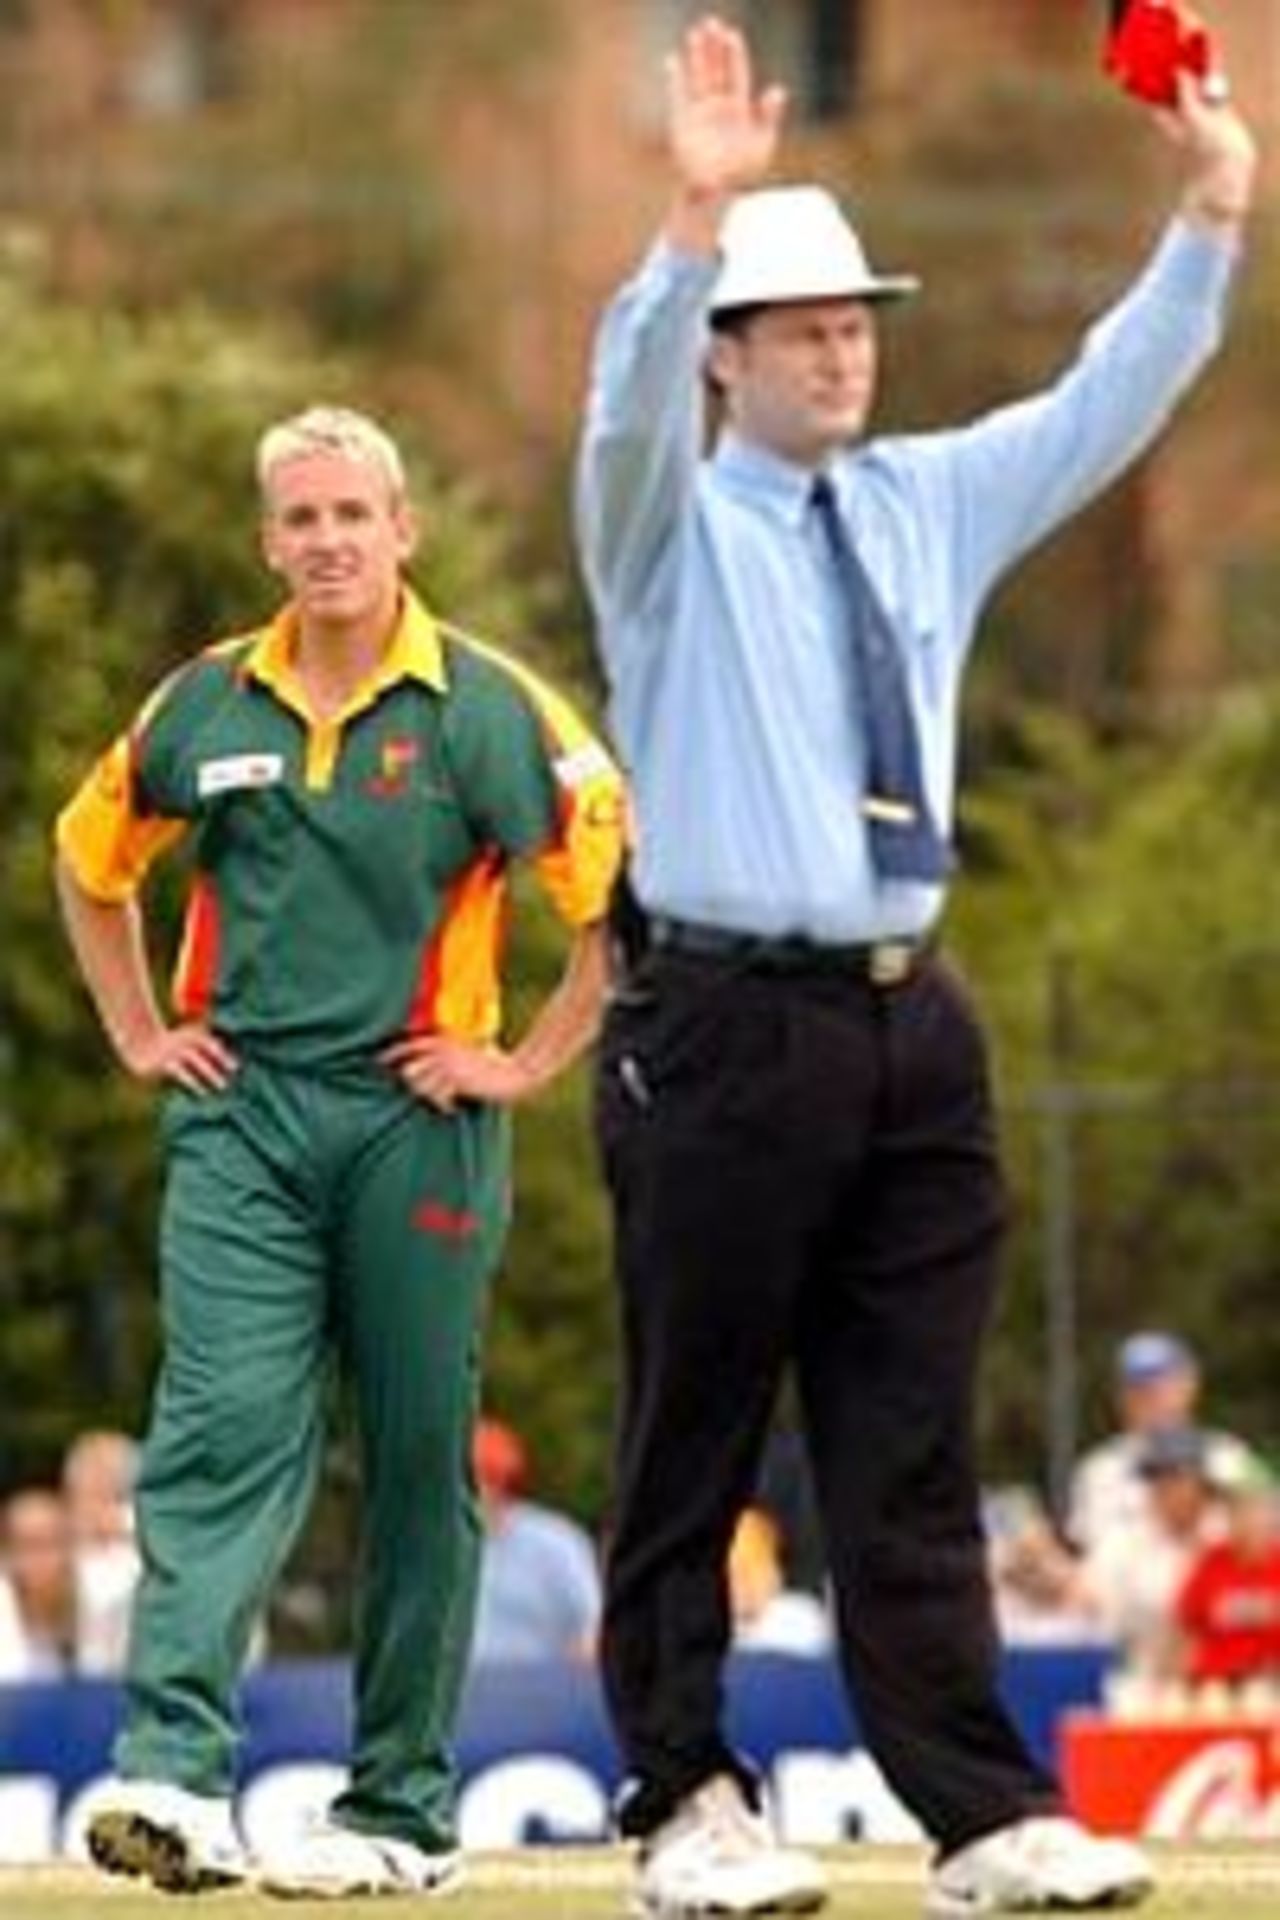 14 Oct 2001: Damien Wright #6 of the Tigers watches on as the umpire signals another six runs off his bowling during the ING One Day cricket match between the New South Wales Blues and the Tasmanian Tigers held at Bankstown Oval, Sydney, Australia.